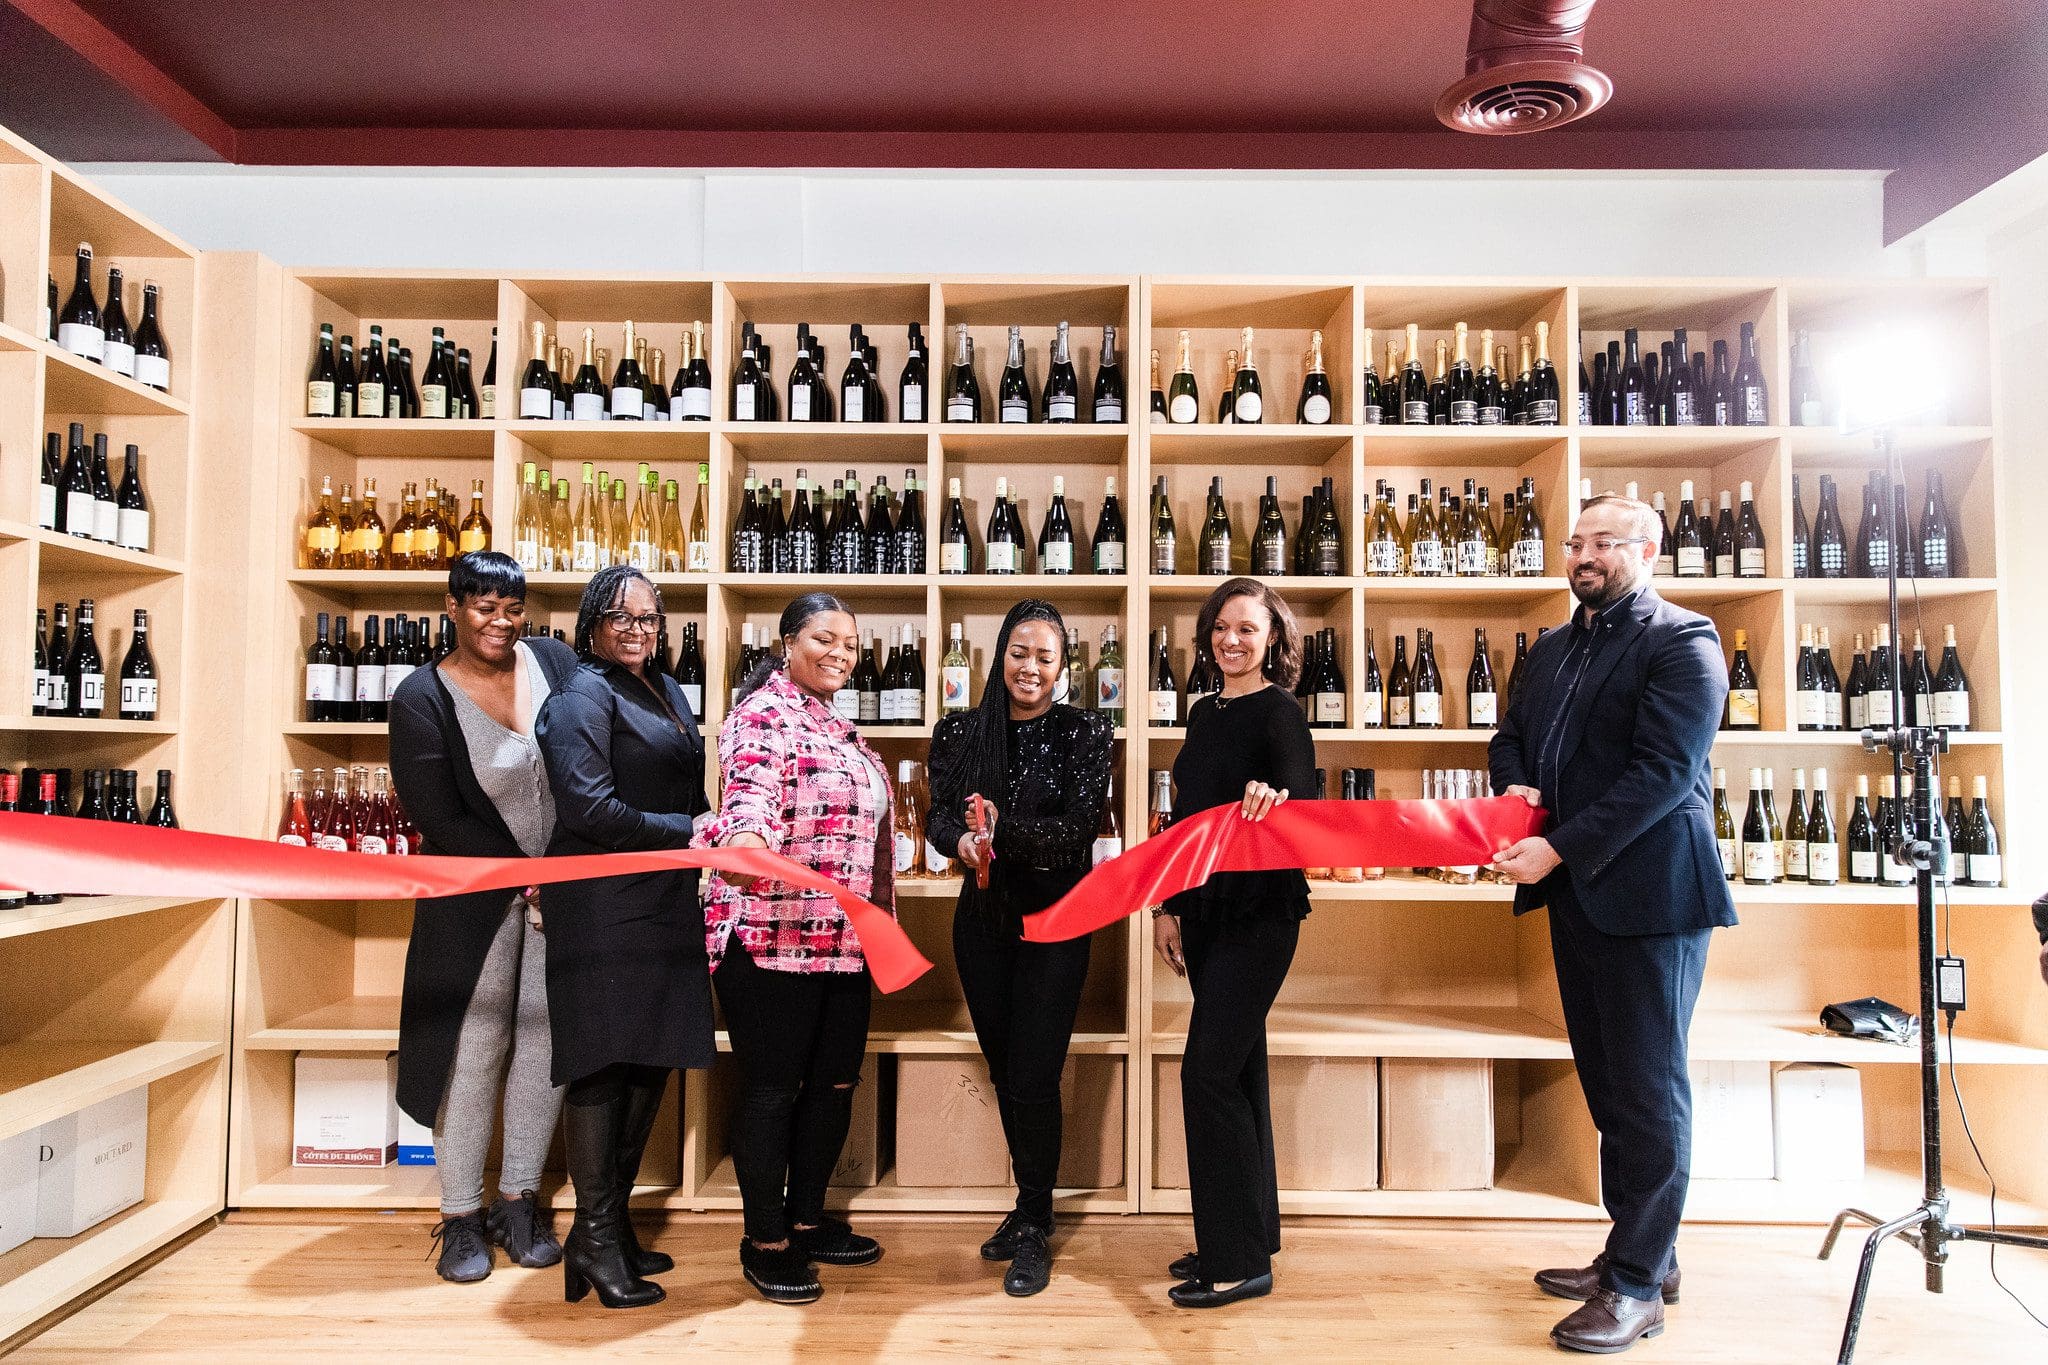 Rivertown neighborhood adds to Detroit’s entrepreneurial landscape with Motor City Match recipient Brix Wine